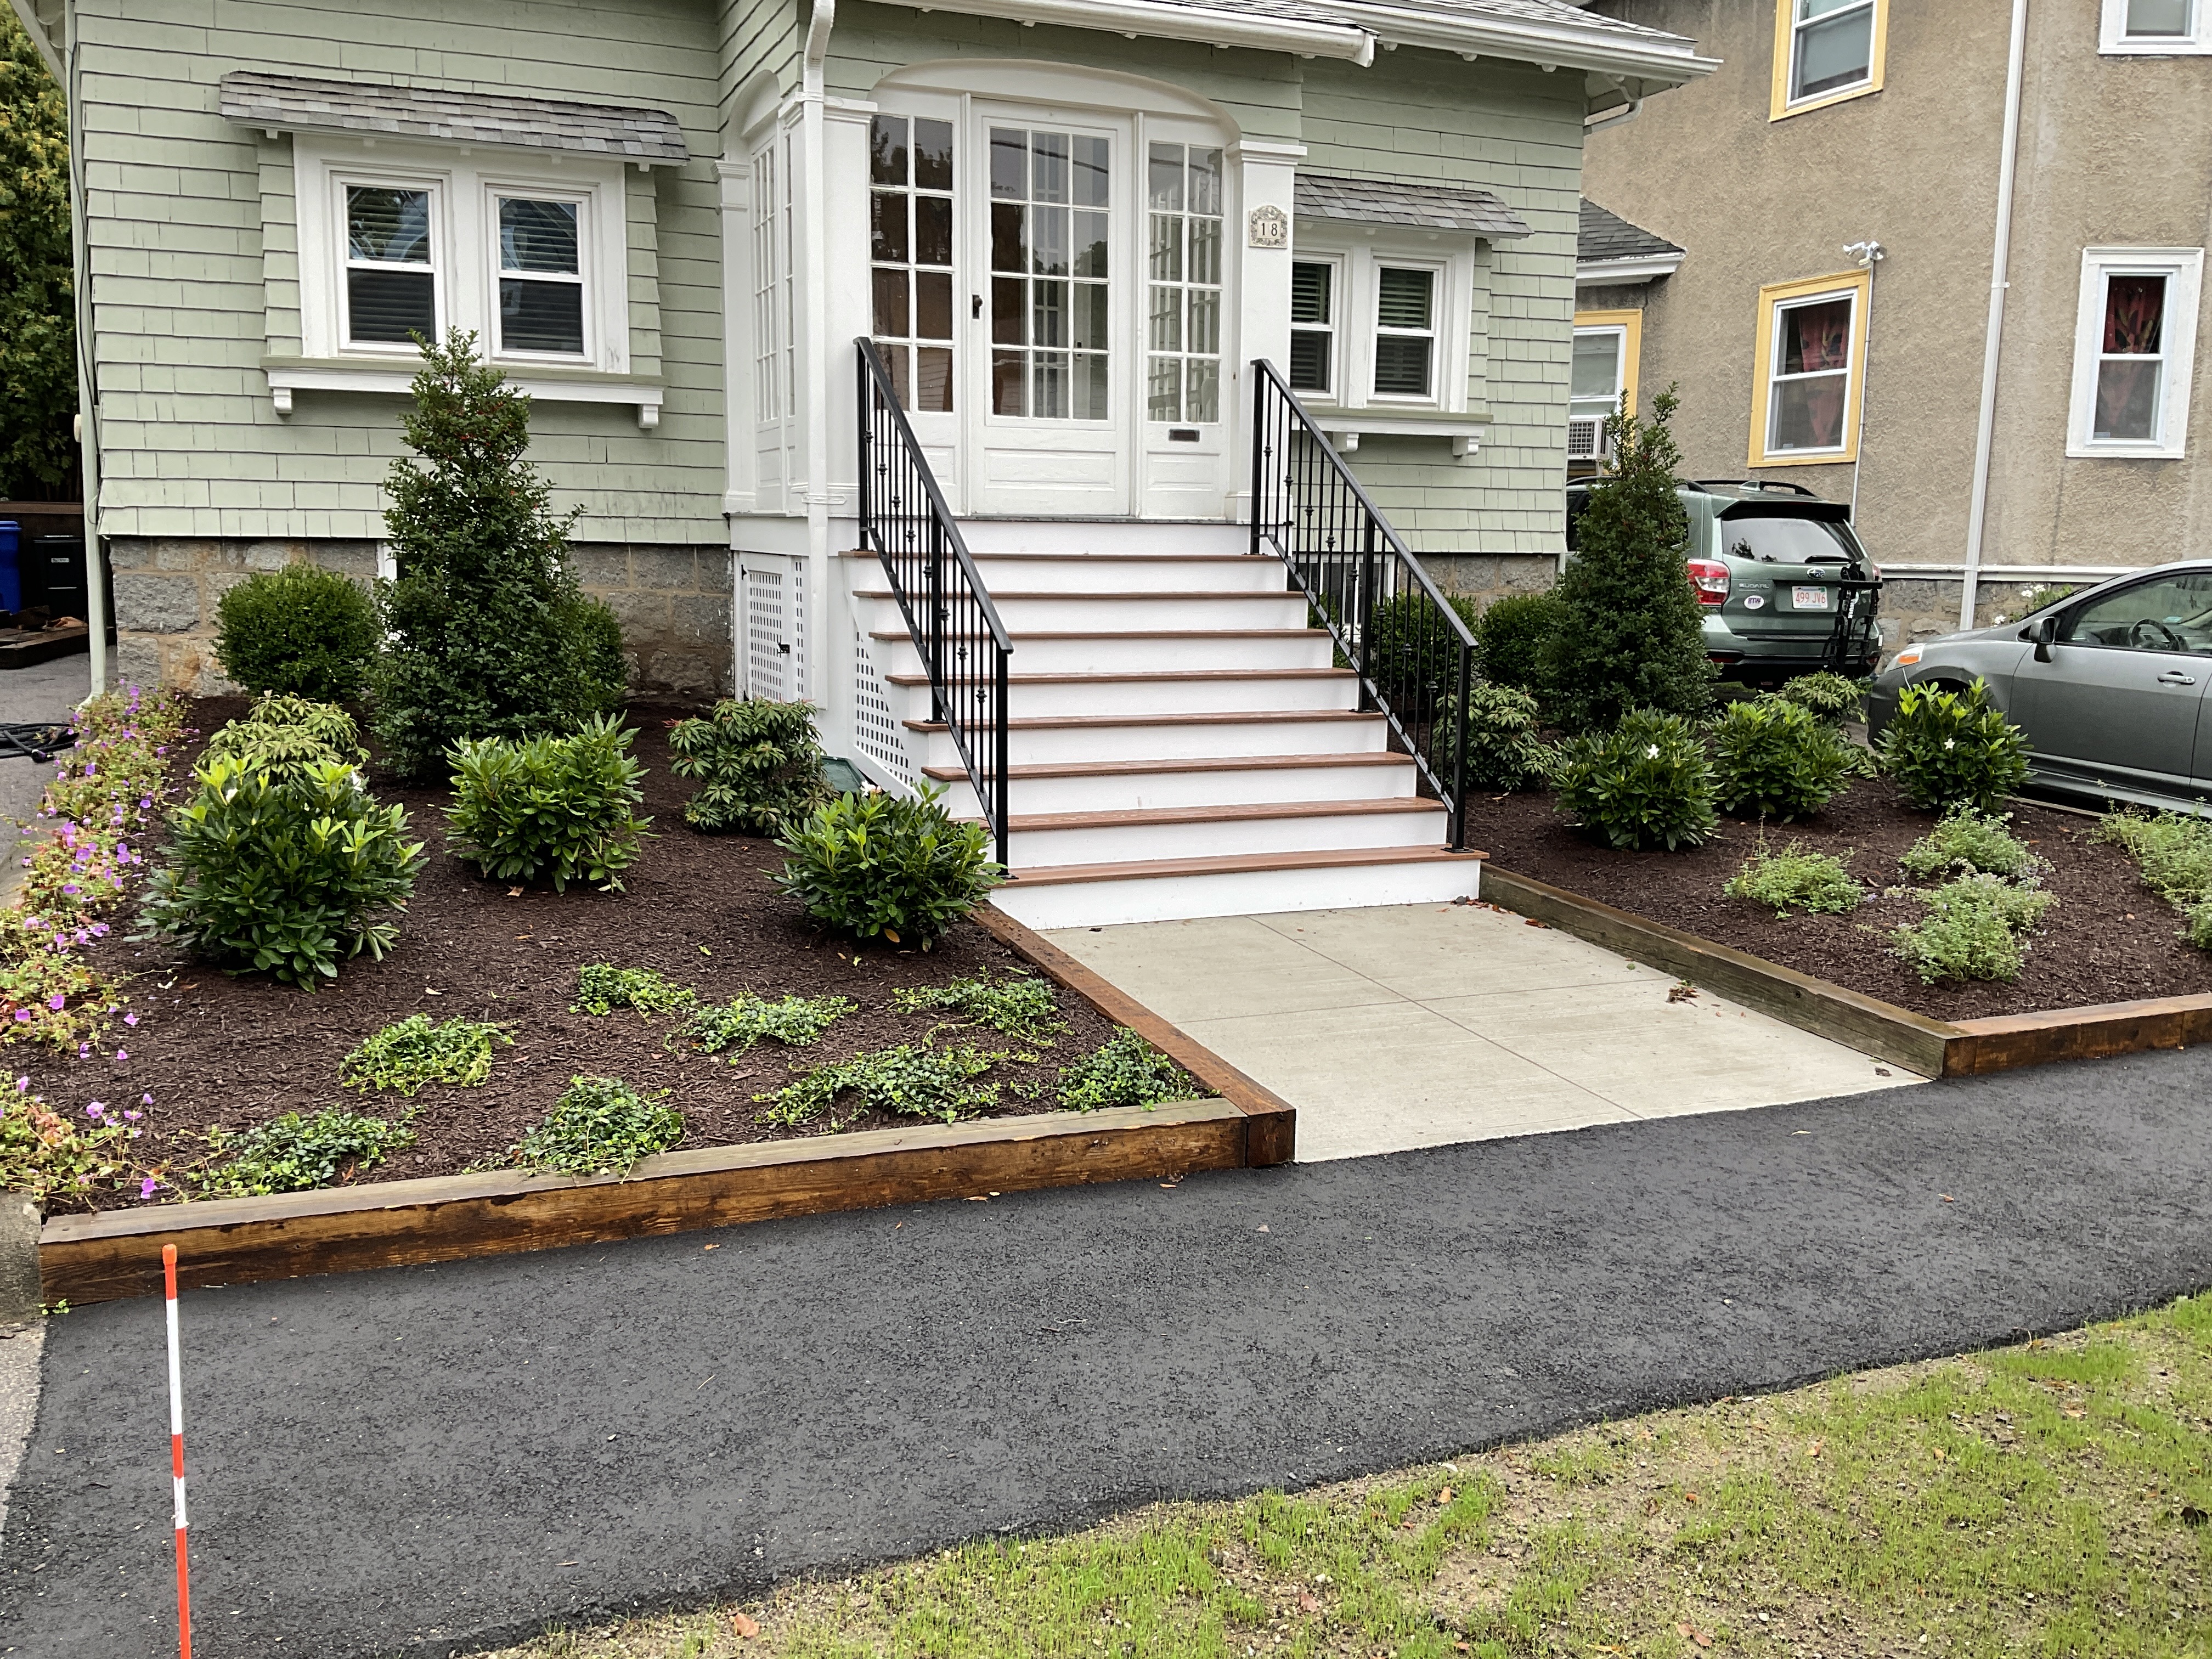 Who needs grass? Let us design a low maintenance landscape with plenty of curb appeal